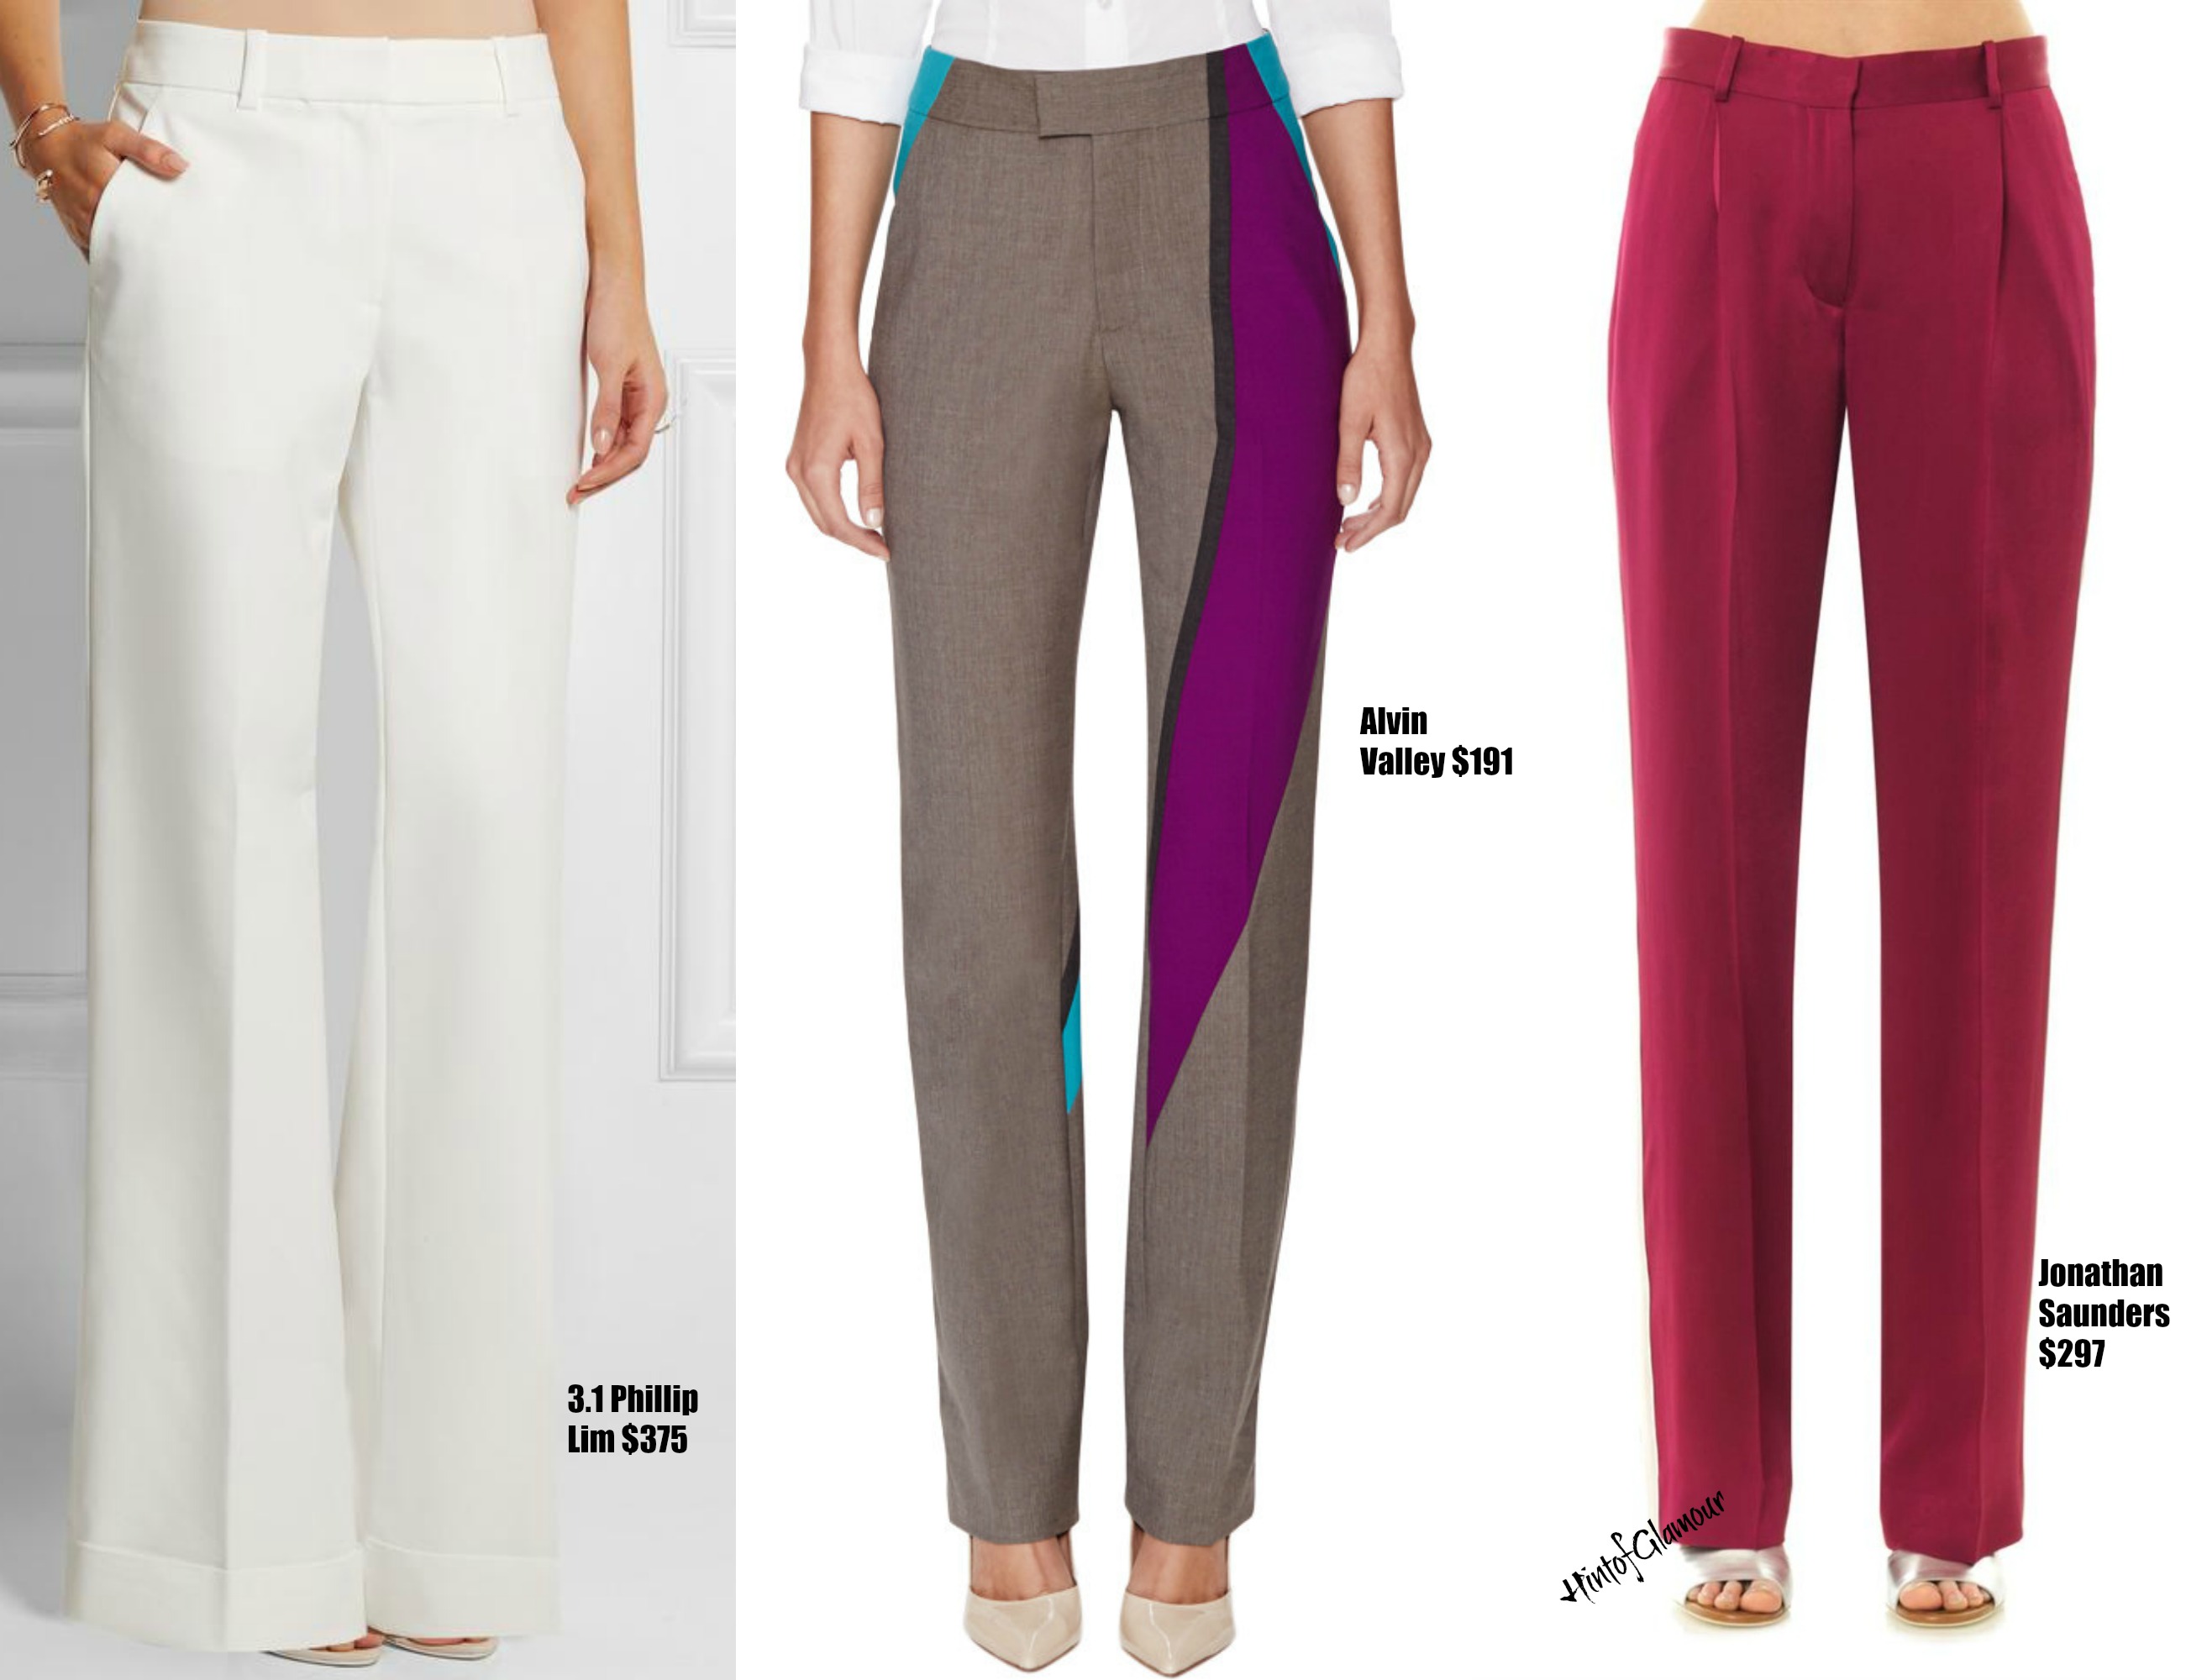 Flare leg trousers – hintofglamour